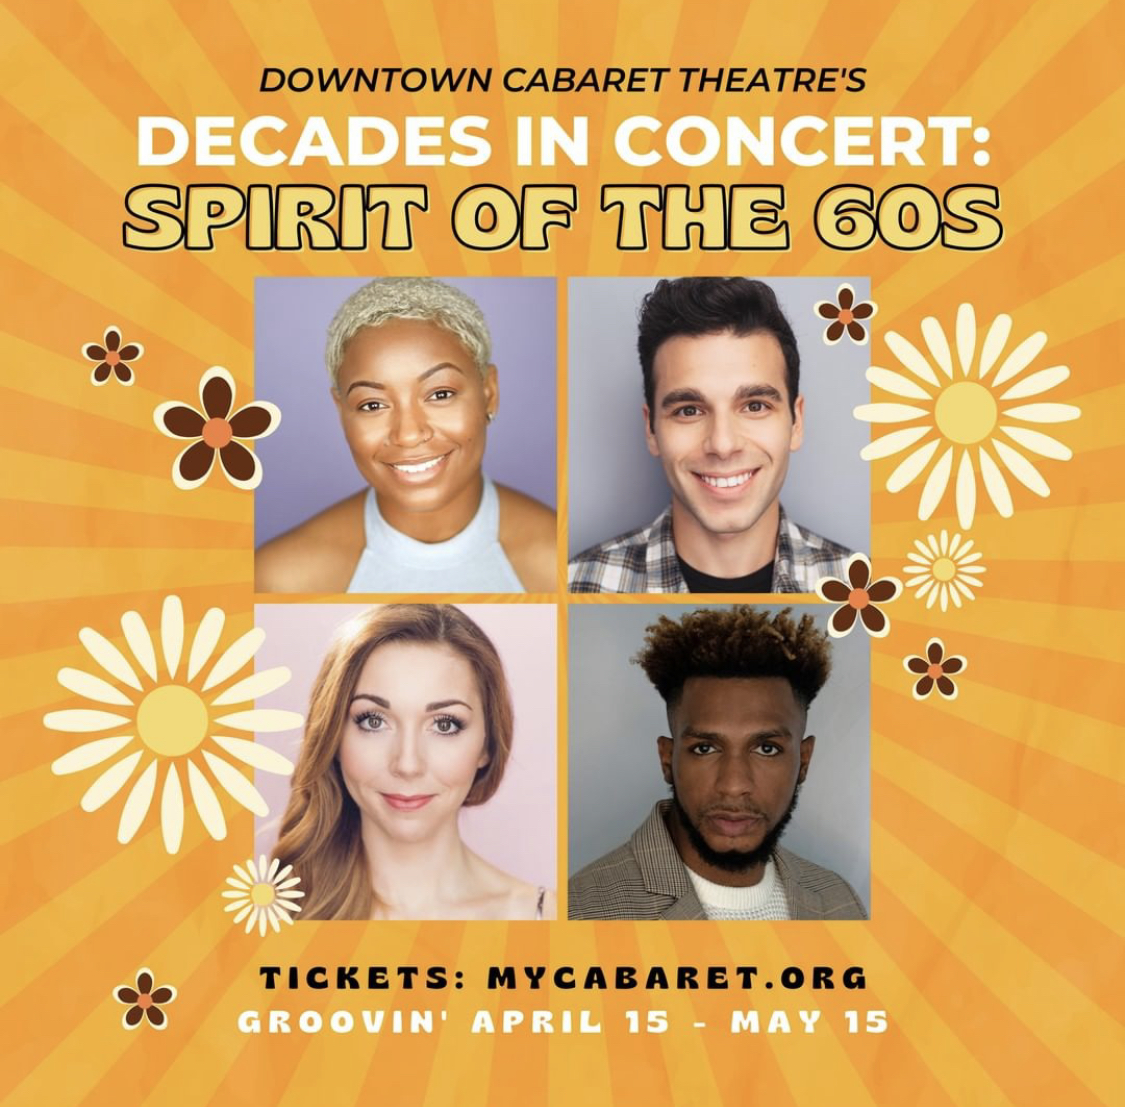 The cast of Decades in Concert: Spirit of the 60s:
Saige Bryan (Singer/Songwriter Saige Notelle, WC Knicks Singer @thesaigenoelle) Robert Peterpaul (CBS’ Bull, Newsies, The Art of Kindness Podcast @robpeterpaul), Mikayla Petrilla (SNL, Inventing Anna, The McKittrick Hotel/Sleep No More @mikaylapetrilla), and Everton Ricketts (SNL, Polar Express: Warner Bros @egricketts) 